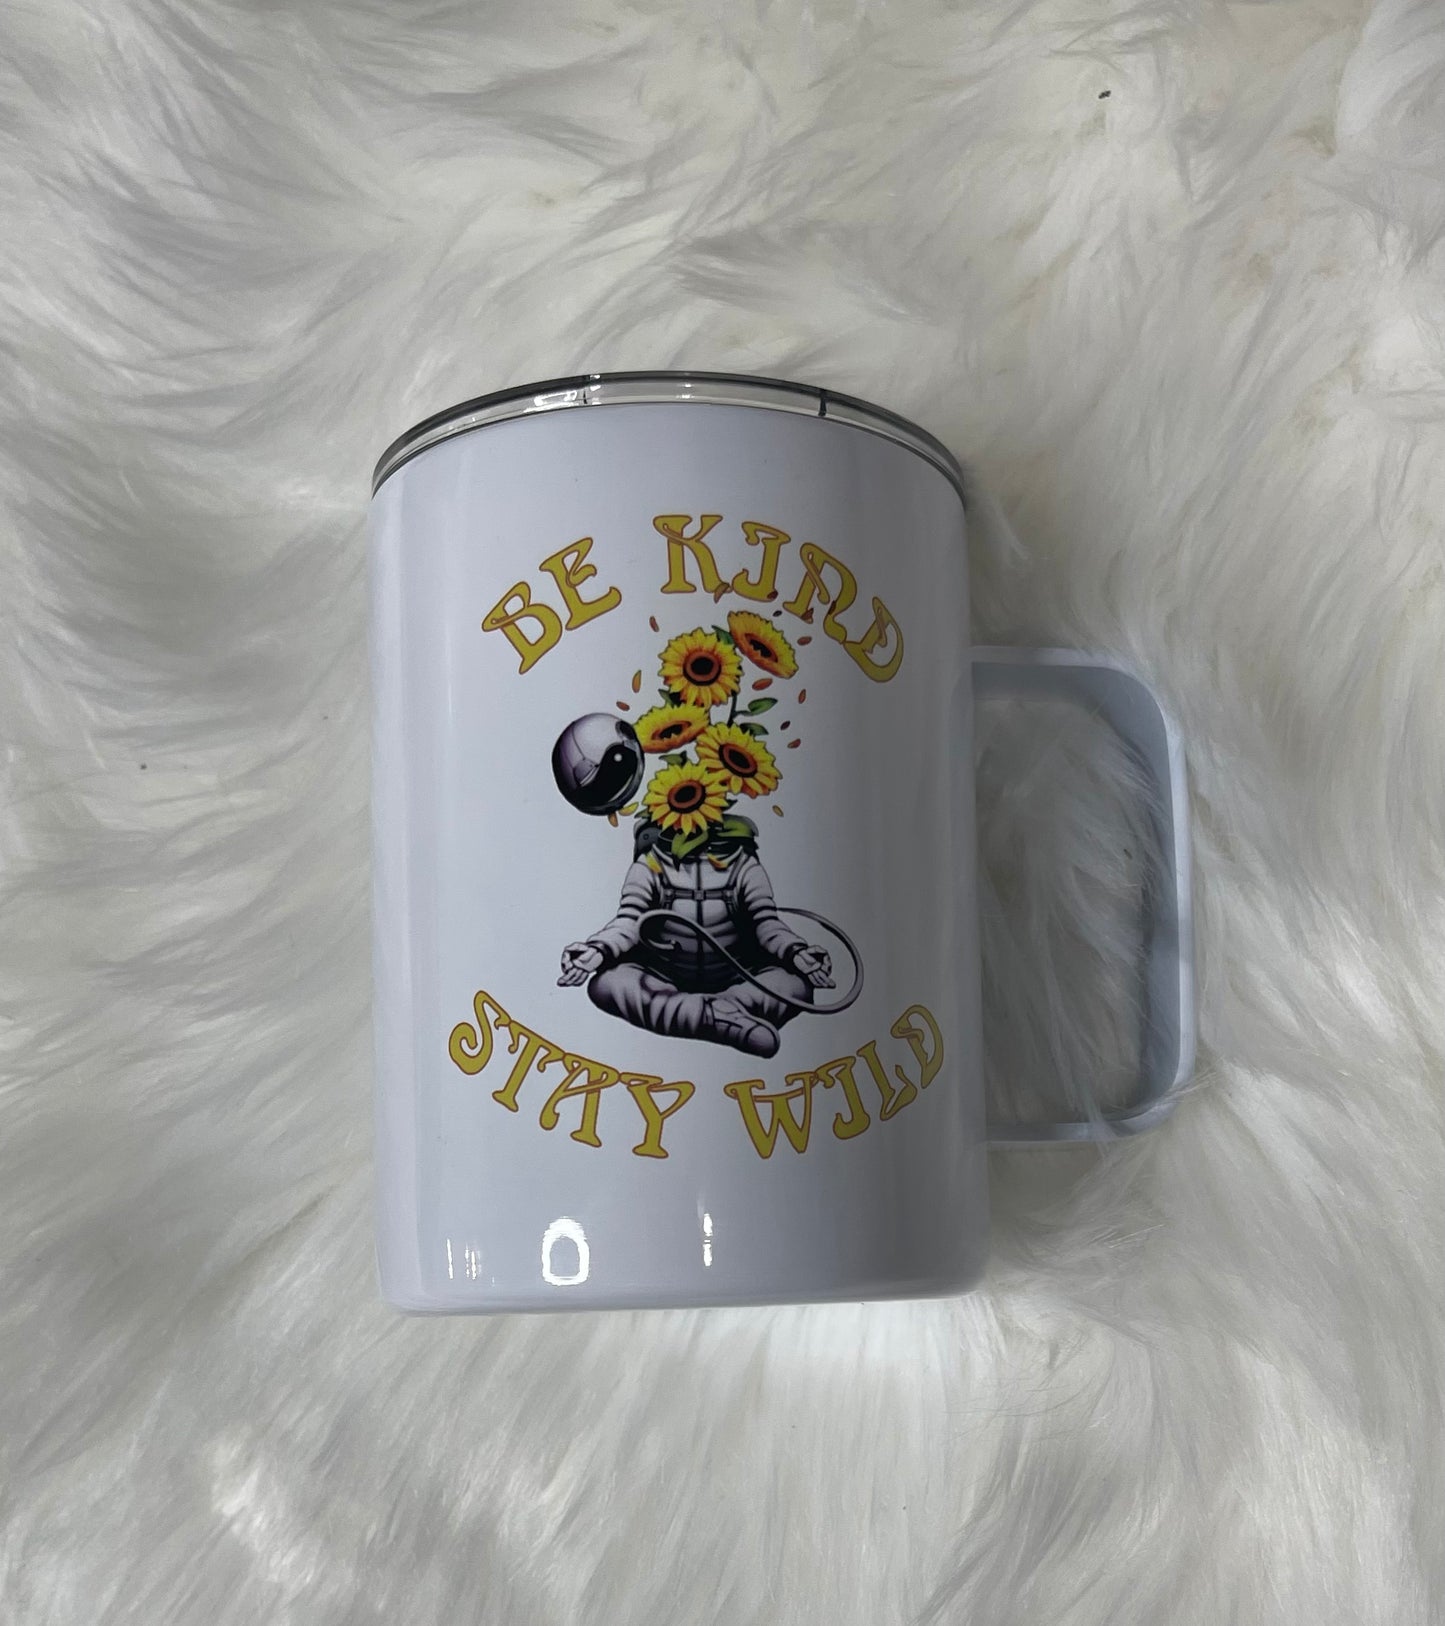 Be kind stay wild. Stainless mug